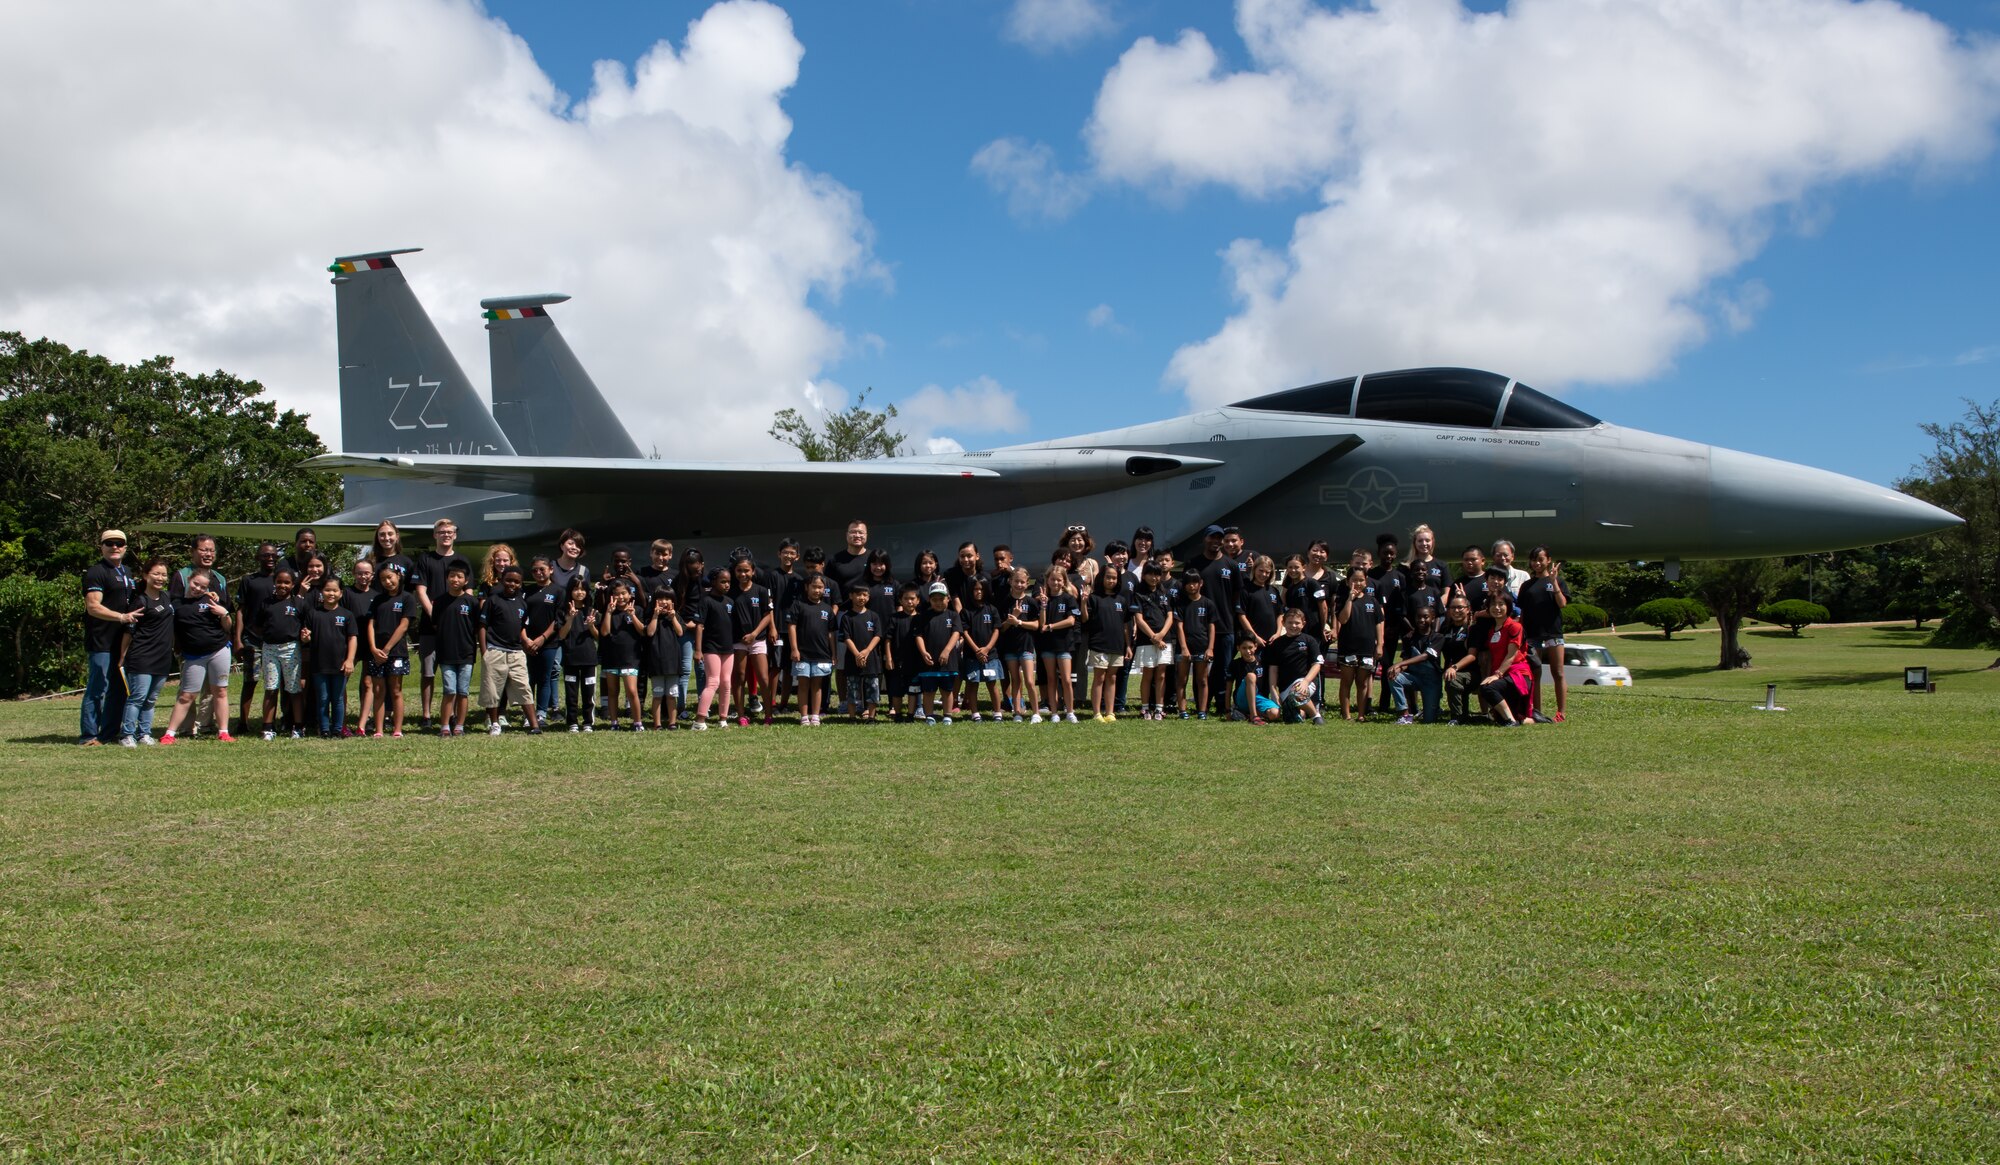 Children from Okinawa and the Kadena Youth Center pose for a photo during Cultural Exchange Day, Sept. 28, 2019, at Kadena Air Base, Japan. The event enabled 49 children from Okinawa and the military community to play and interact with each other through a variety of both American and Japanese games and challenges. (U.S. Air Force photo by Staff Sgt. Micaiah Anthony)